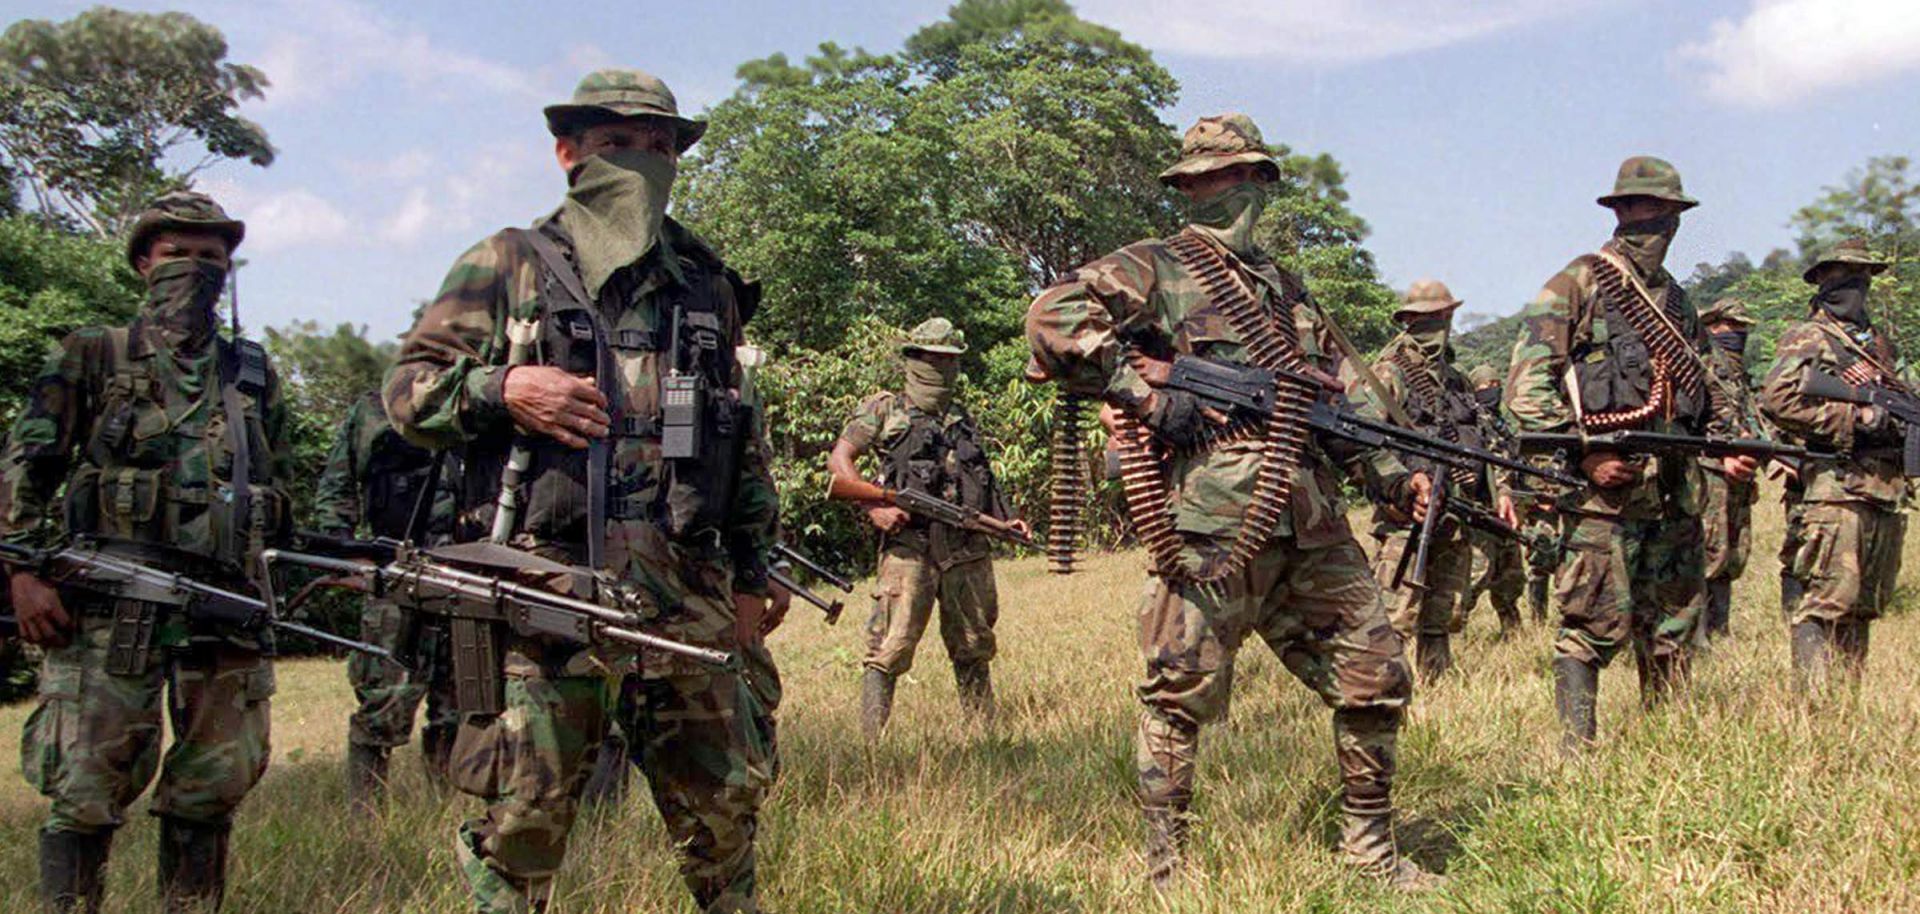 Colombian United Self-Defense Forces (AUC) train Jan. 29, 2000, in the mountains northwest of Bogota. Though the group has officially been disbanded, its parts live on through Colombia's drug trade.